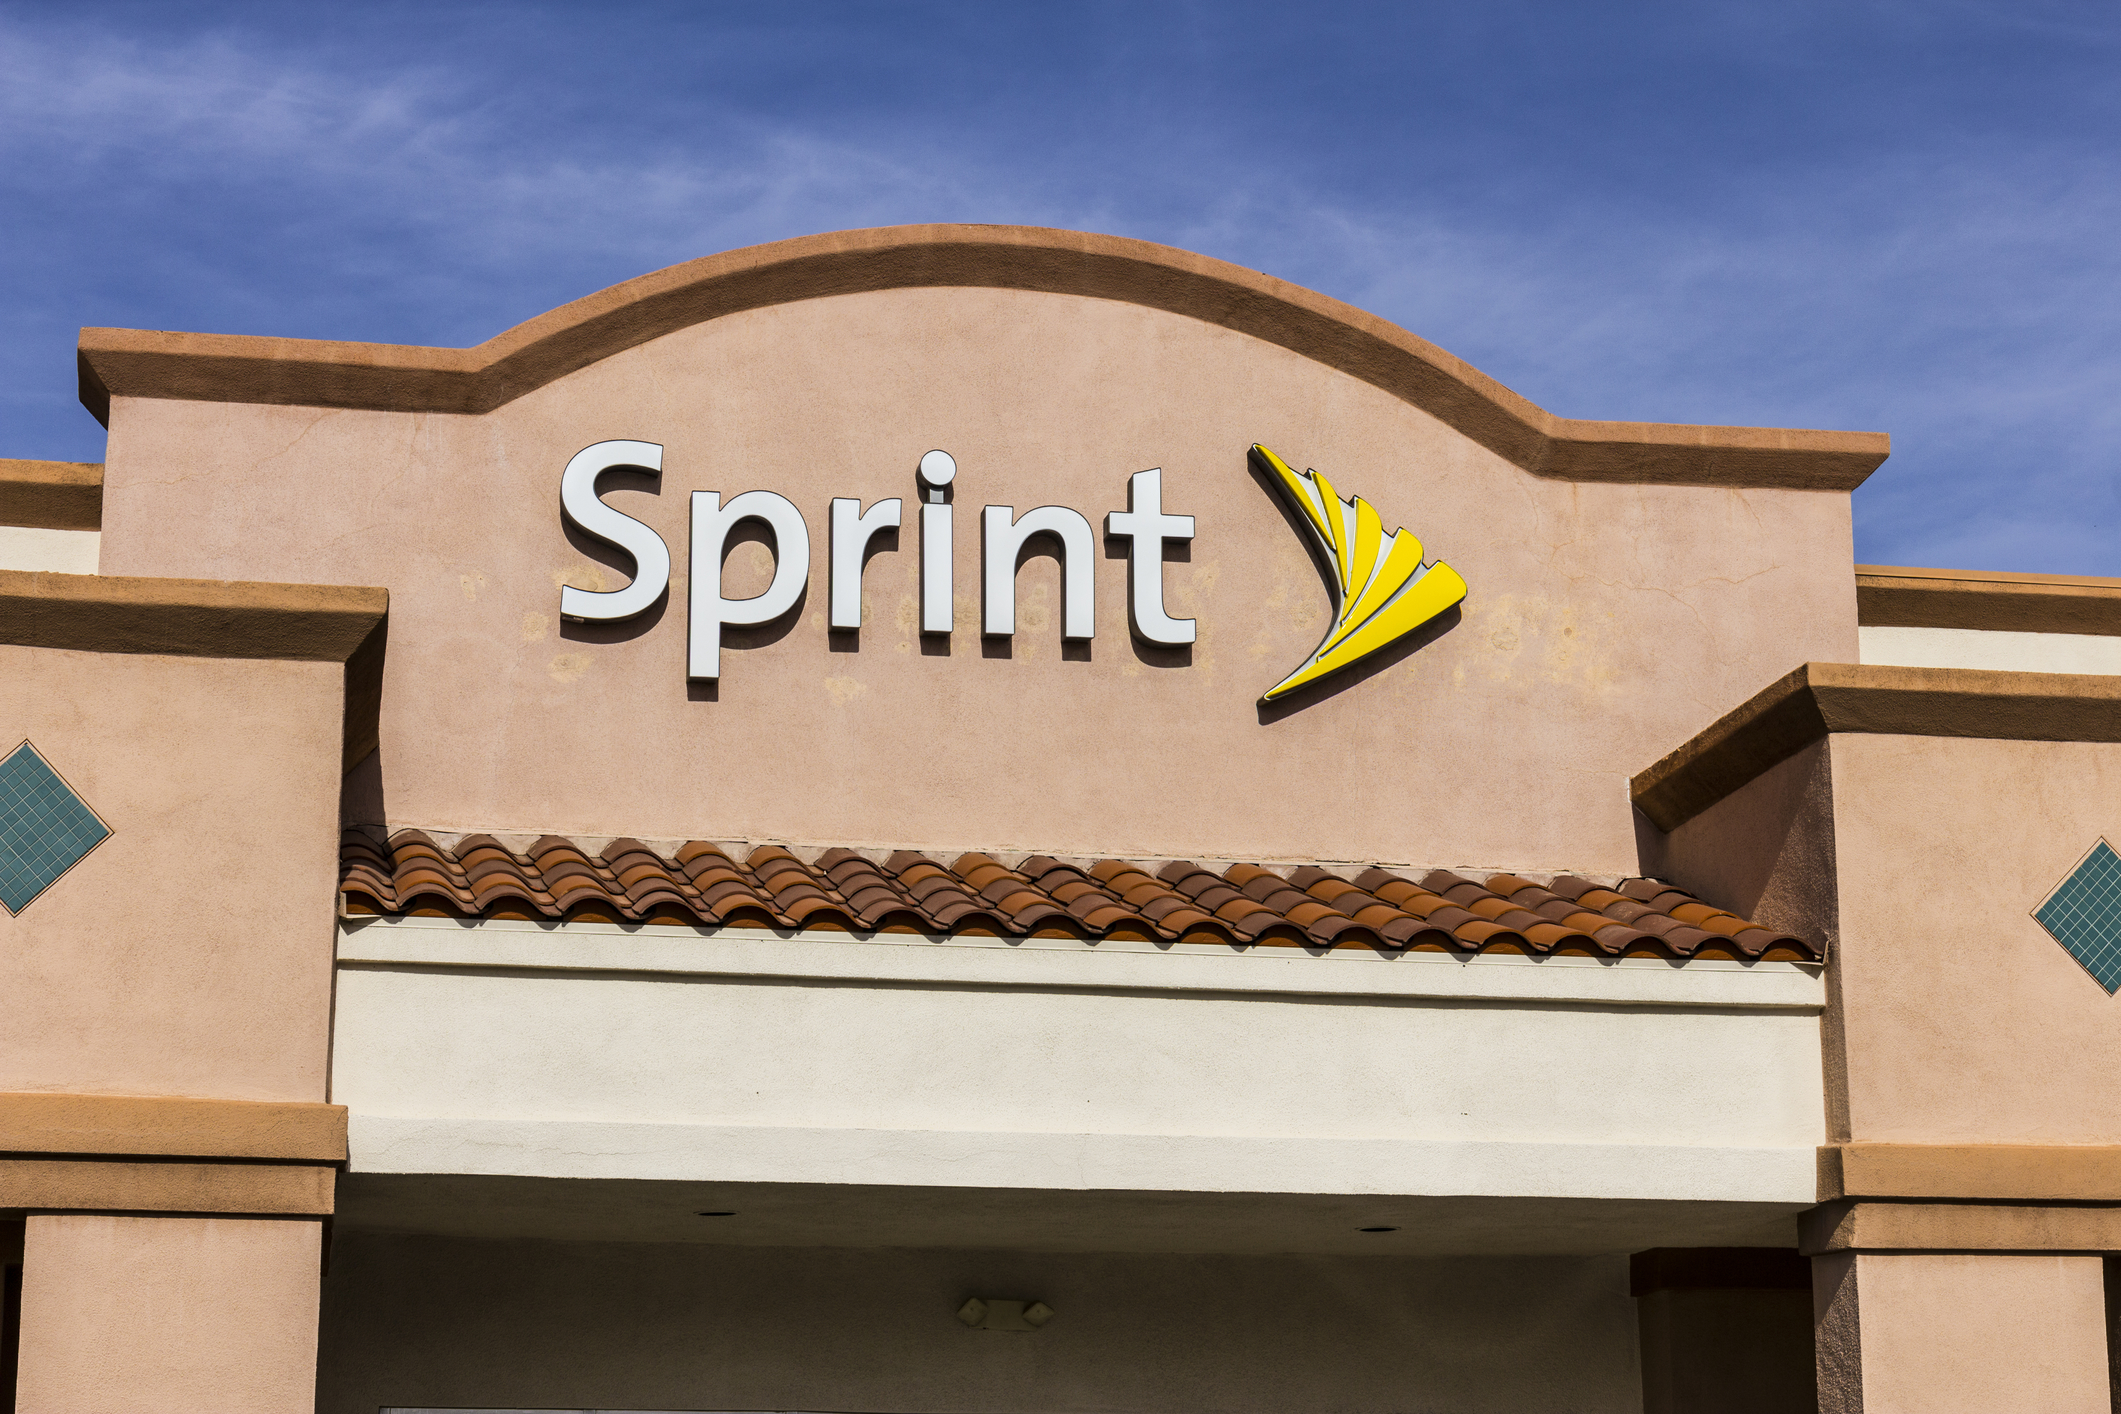 Sprint’s new 55+ plan: Get 2 lines of unlimited everything for $35 per line